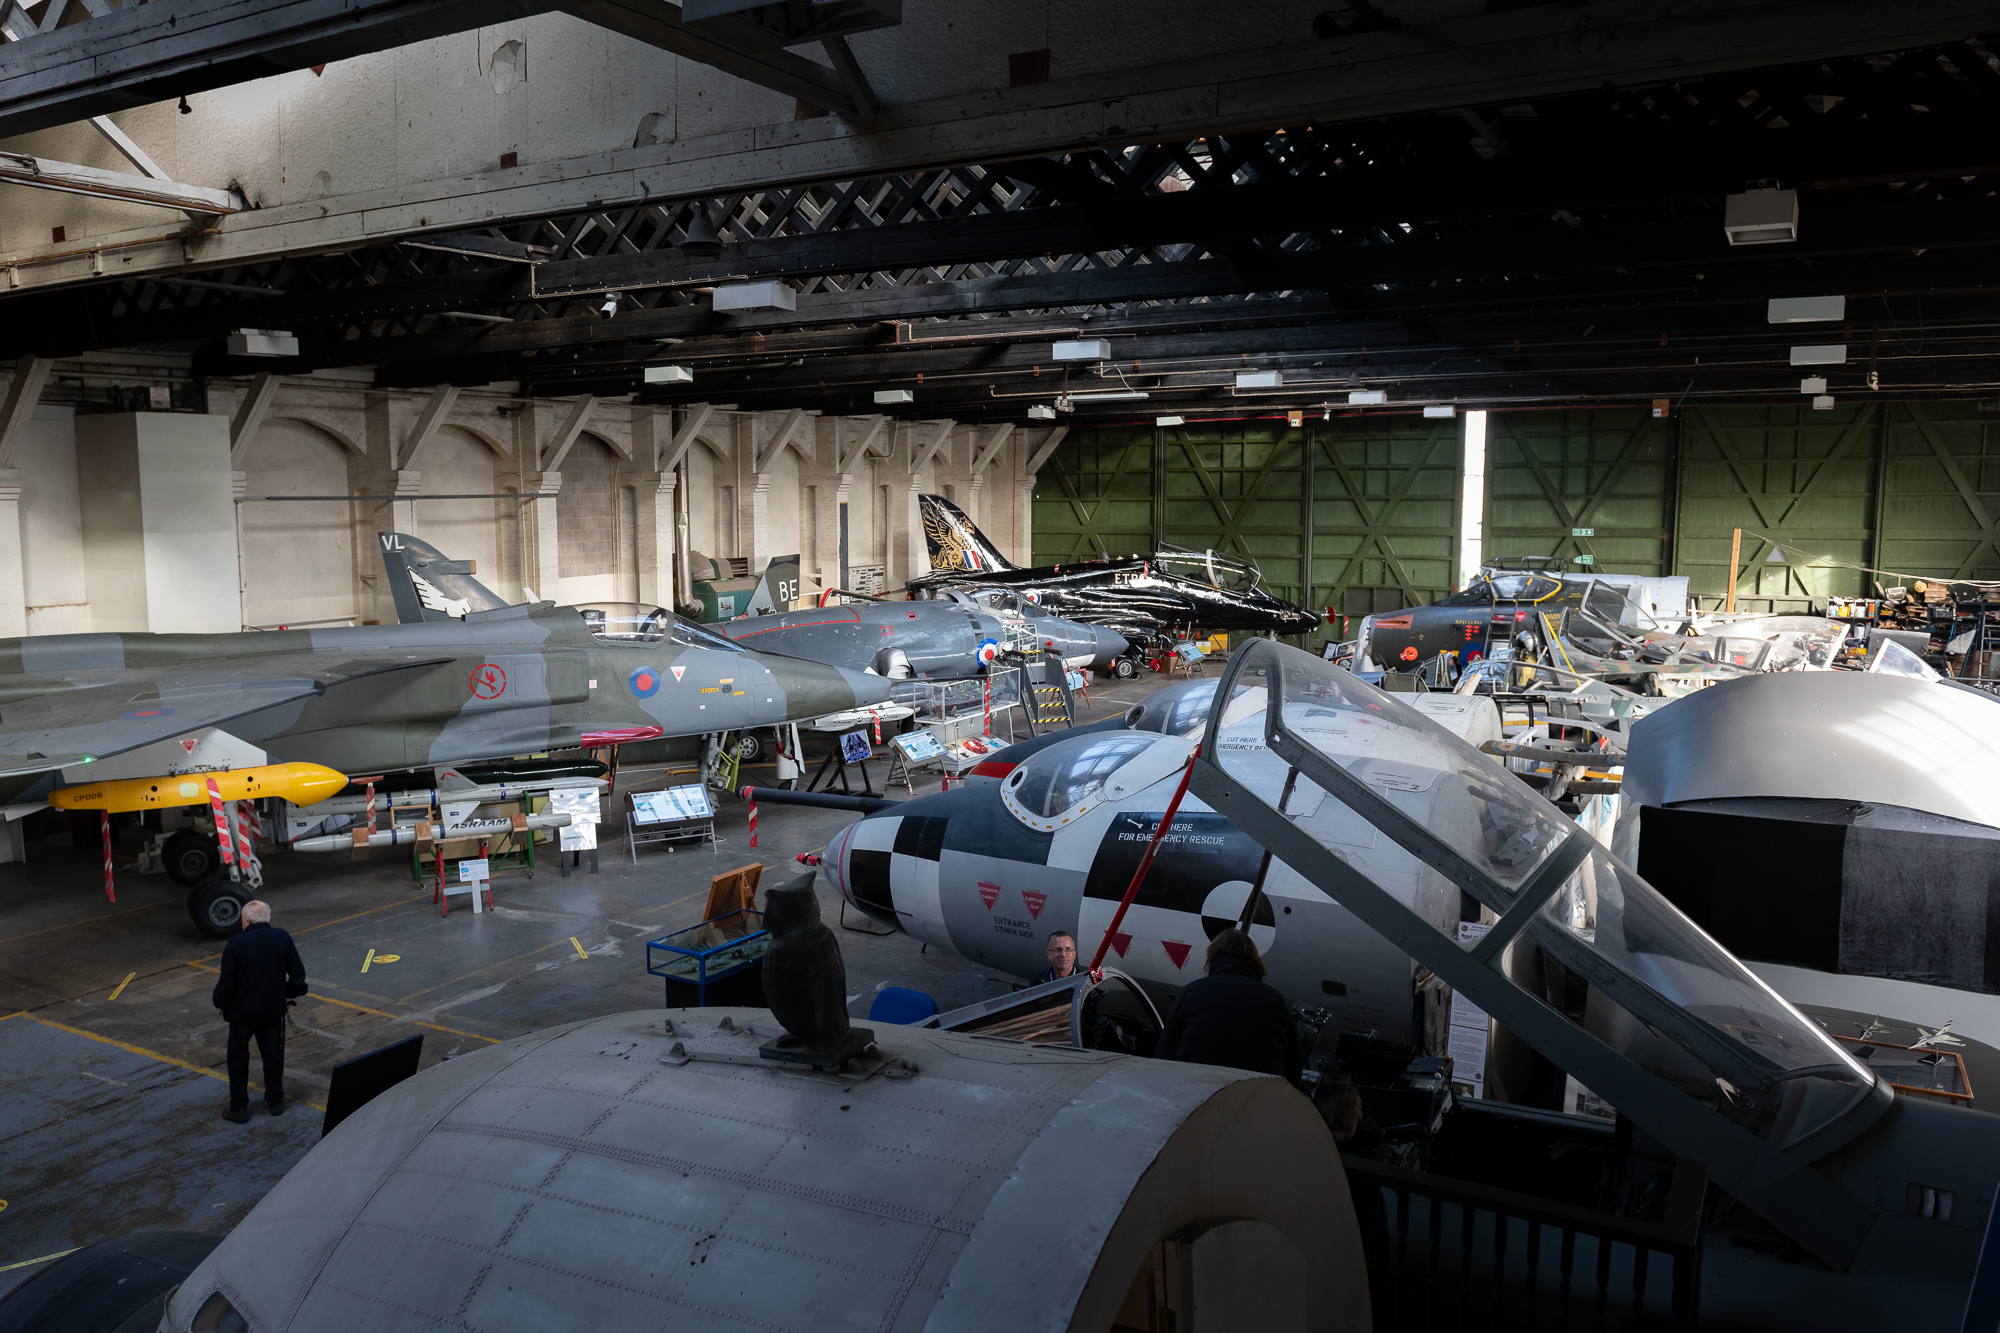 The Boscombe Down Aviation Collection